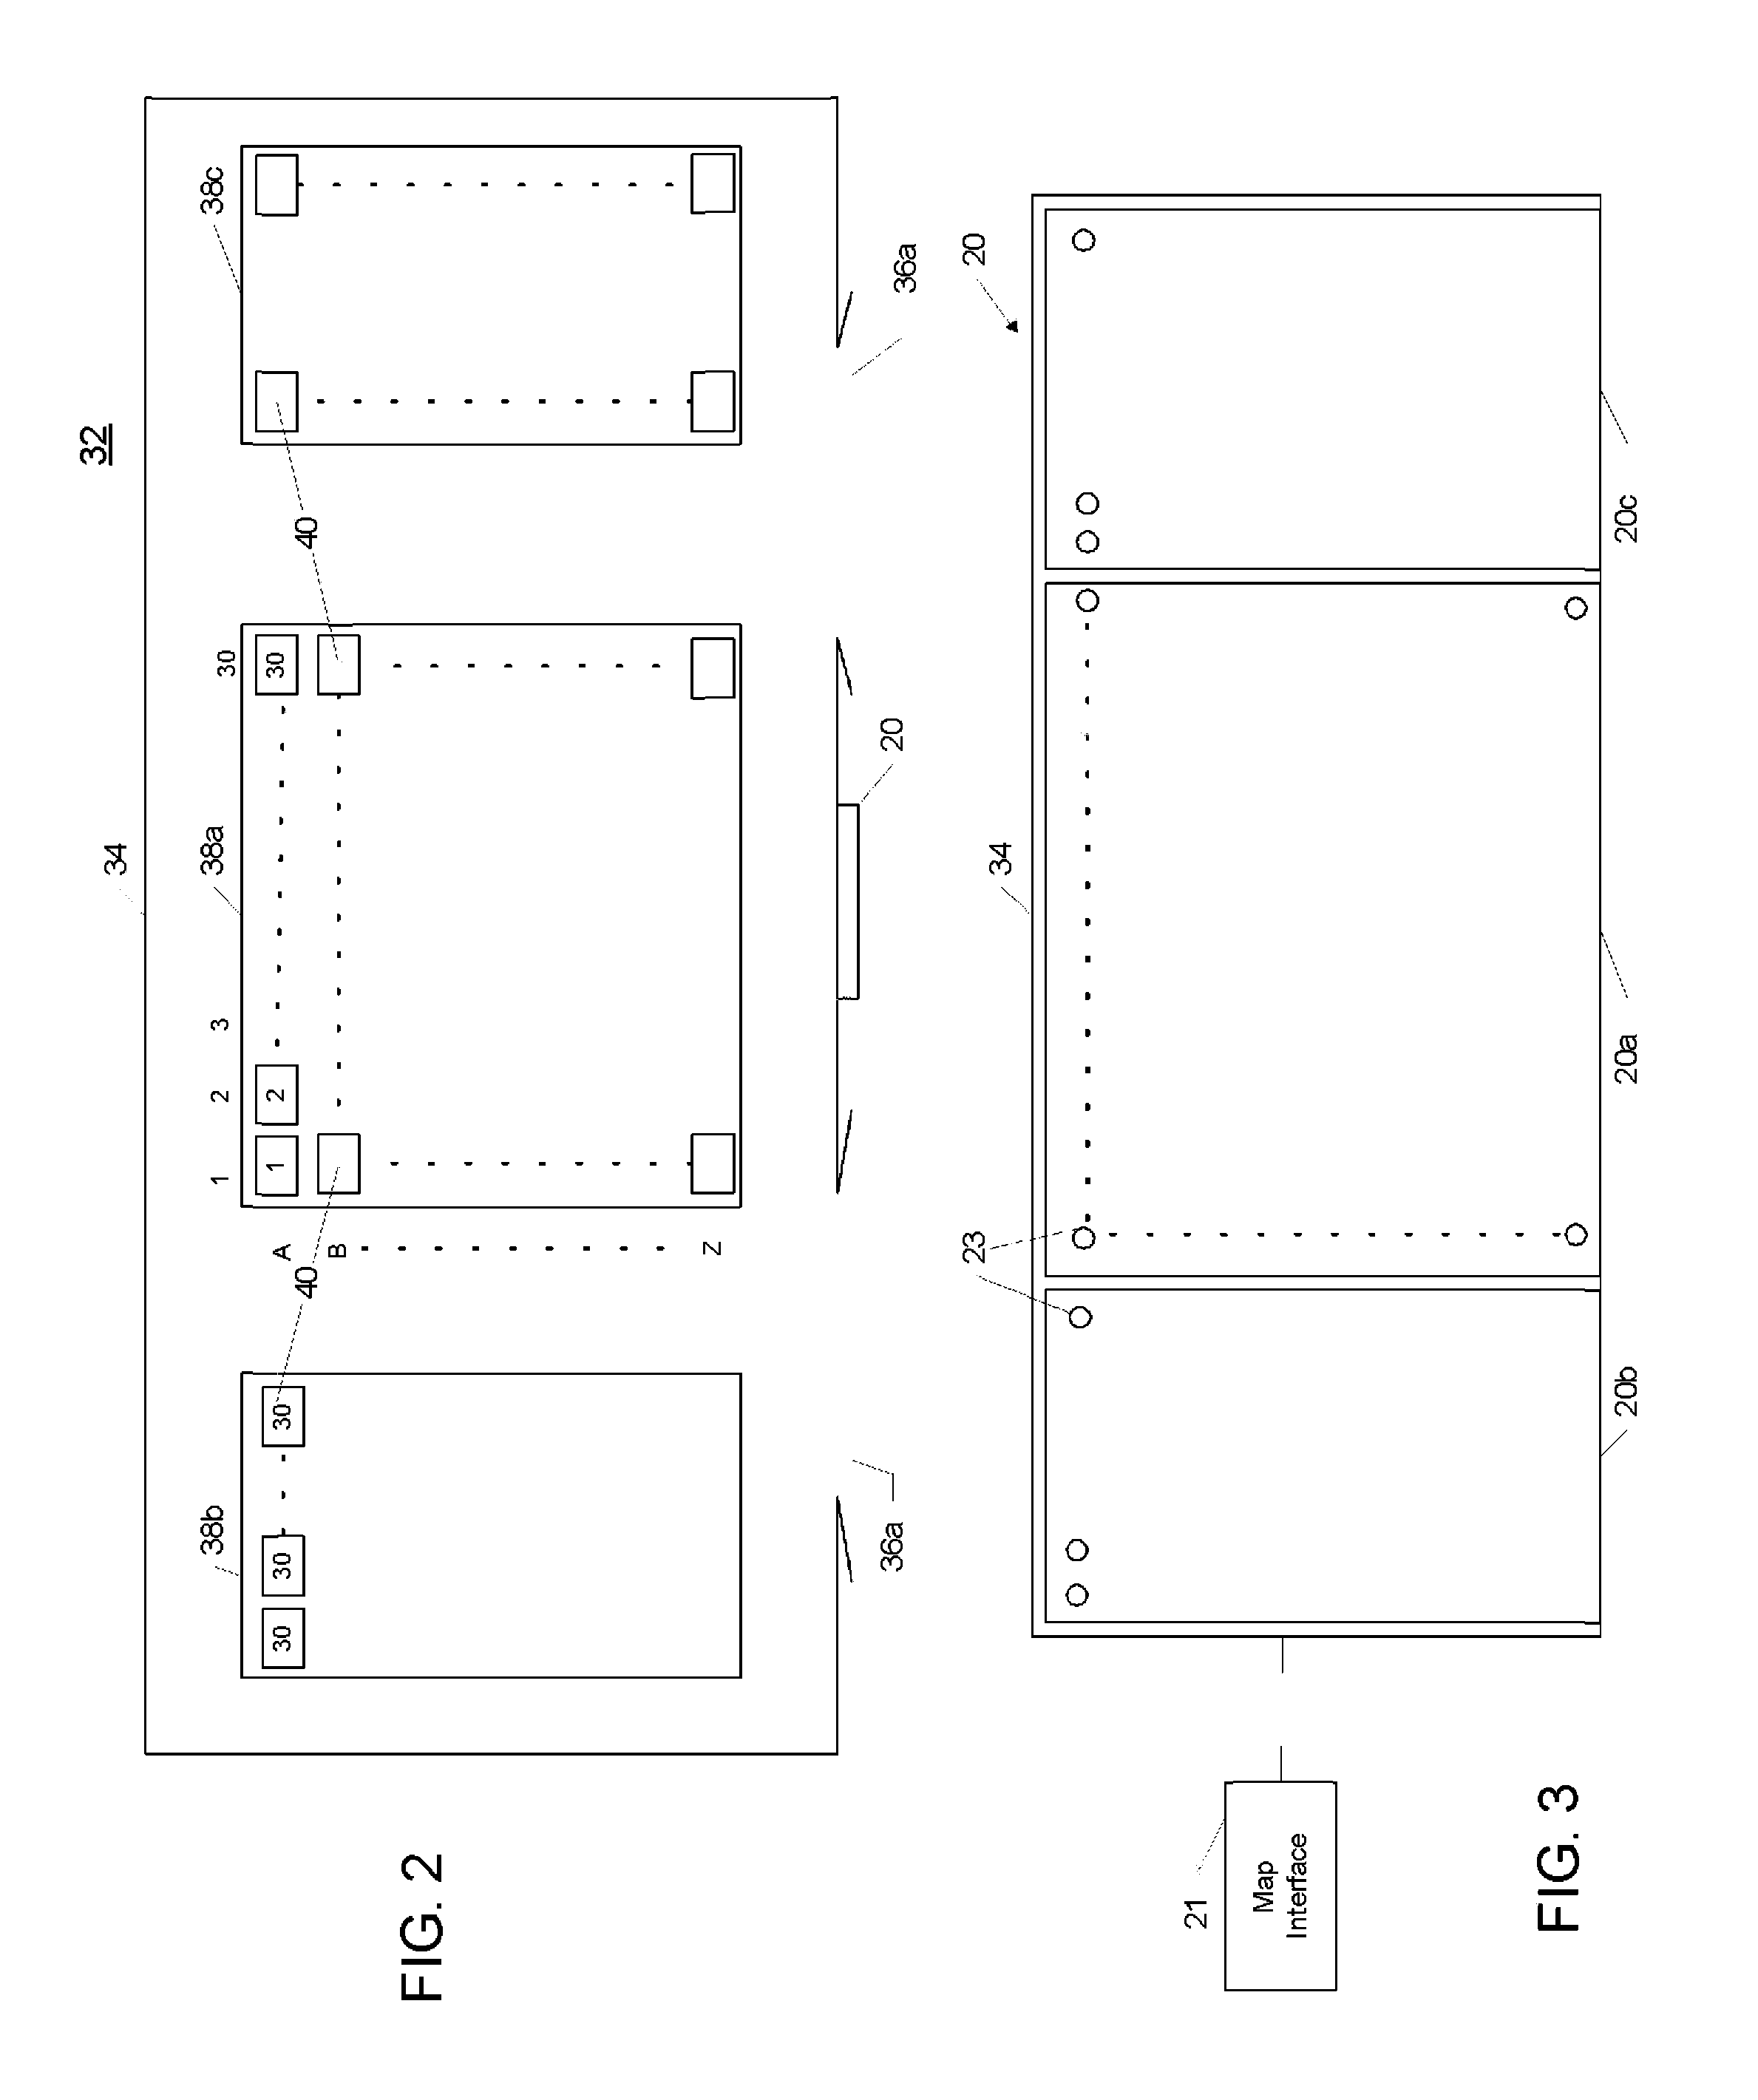 Seat occupancy detection and display system